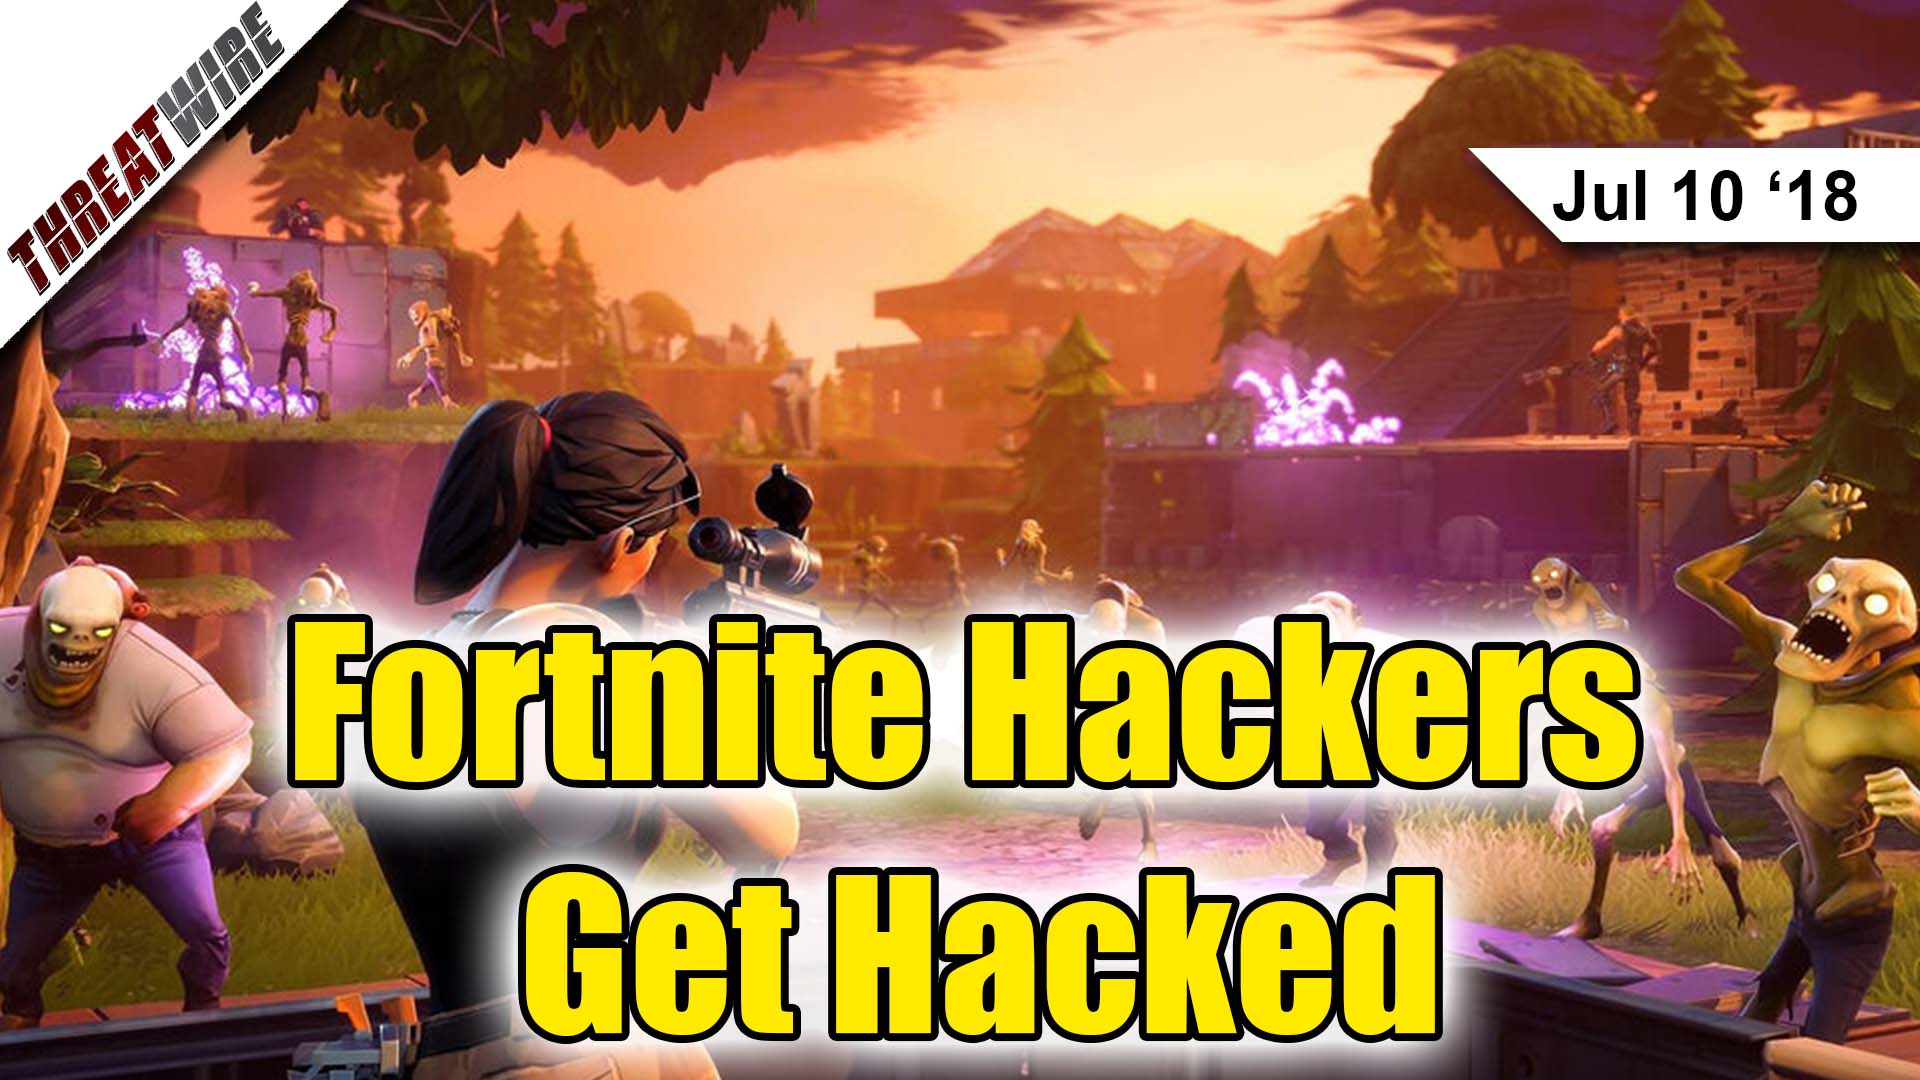 threat wire podcast fortnite hackers get hacked mapping public fitness data on polar threatwire free listening on podbean app - hackers de fortnite